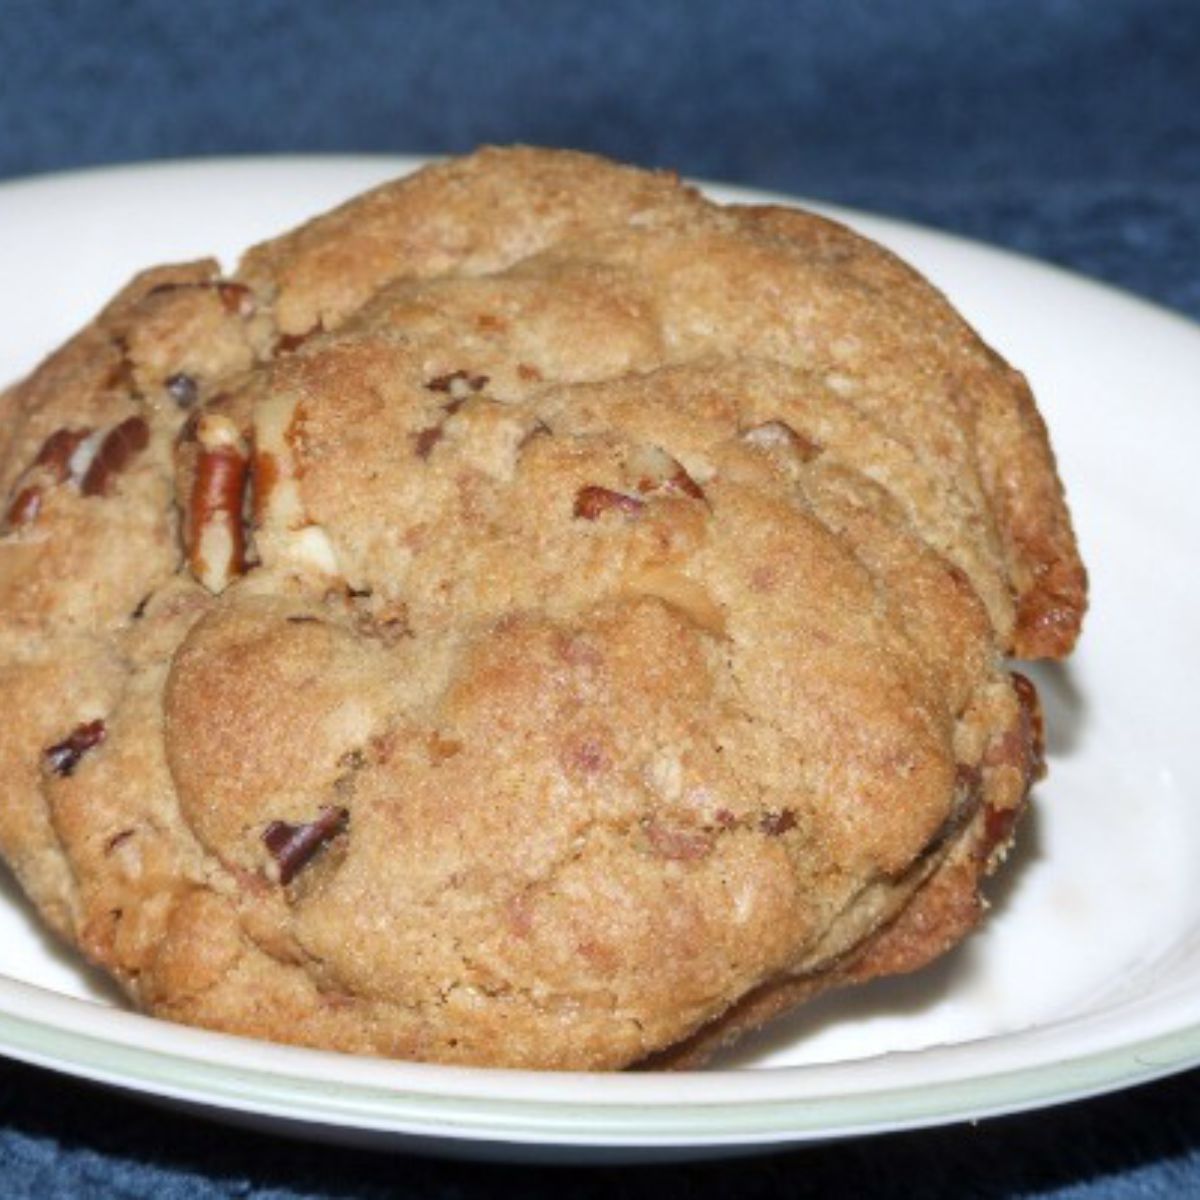 https://smartsavvyliving.com/wp-content/uploads/2023/07/browned-butter-chocolate-chip-cookies-featured.jpg